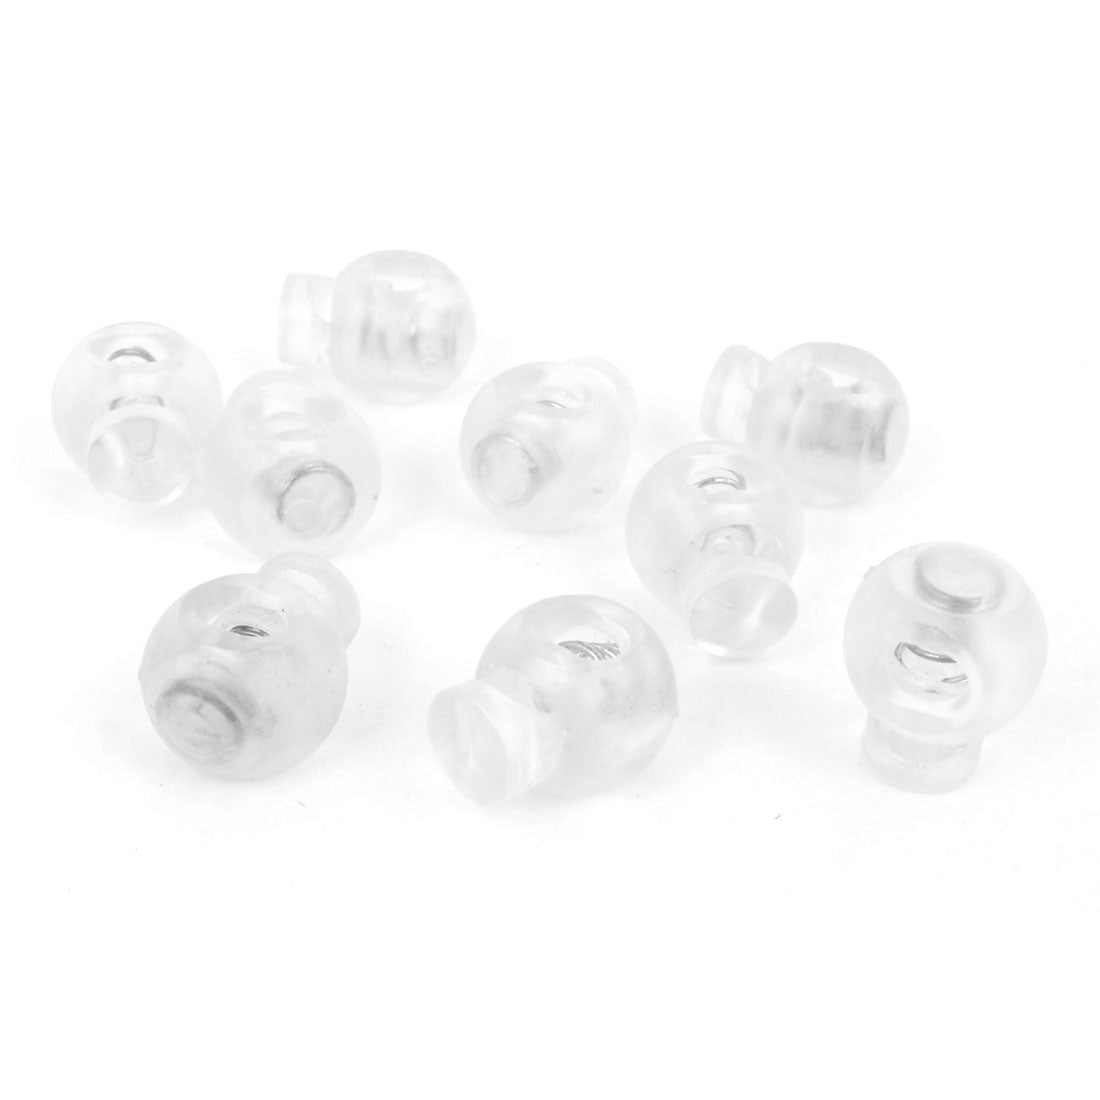 uxcell Uxcell Backpack Drawstring Clear 6.5mmx5mm Single Hole Round Head Spring Cord Locks Toggles 10 Pcs